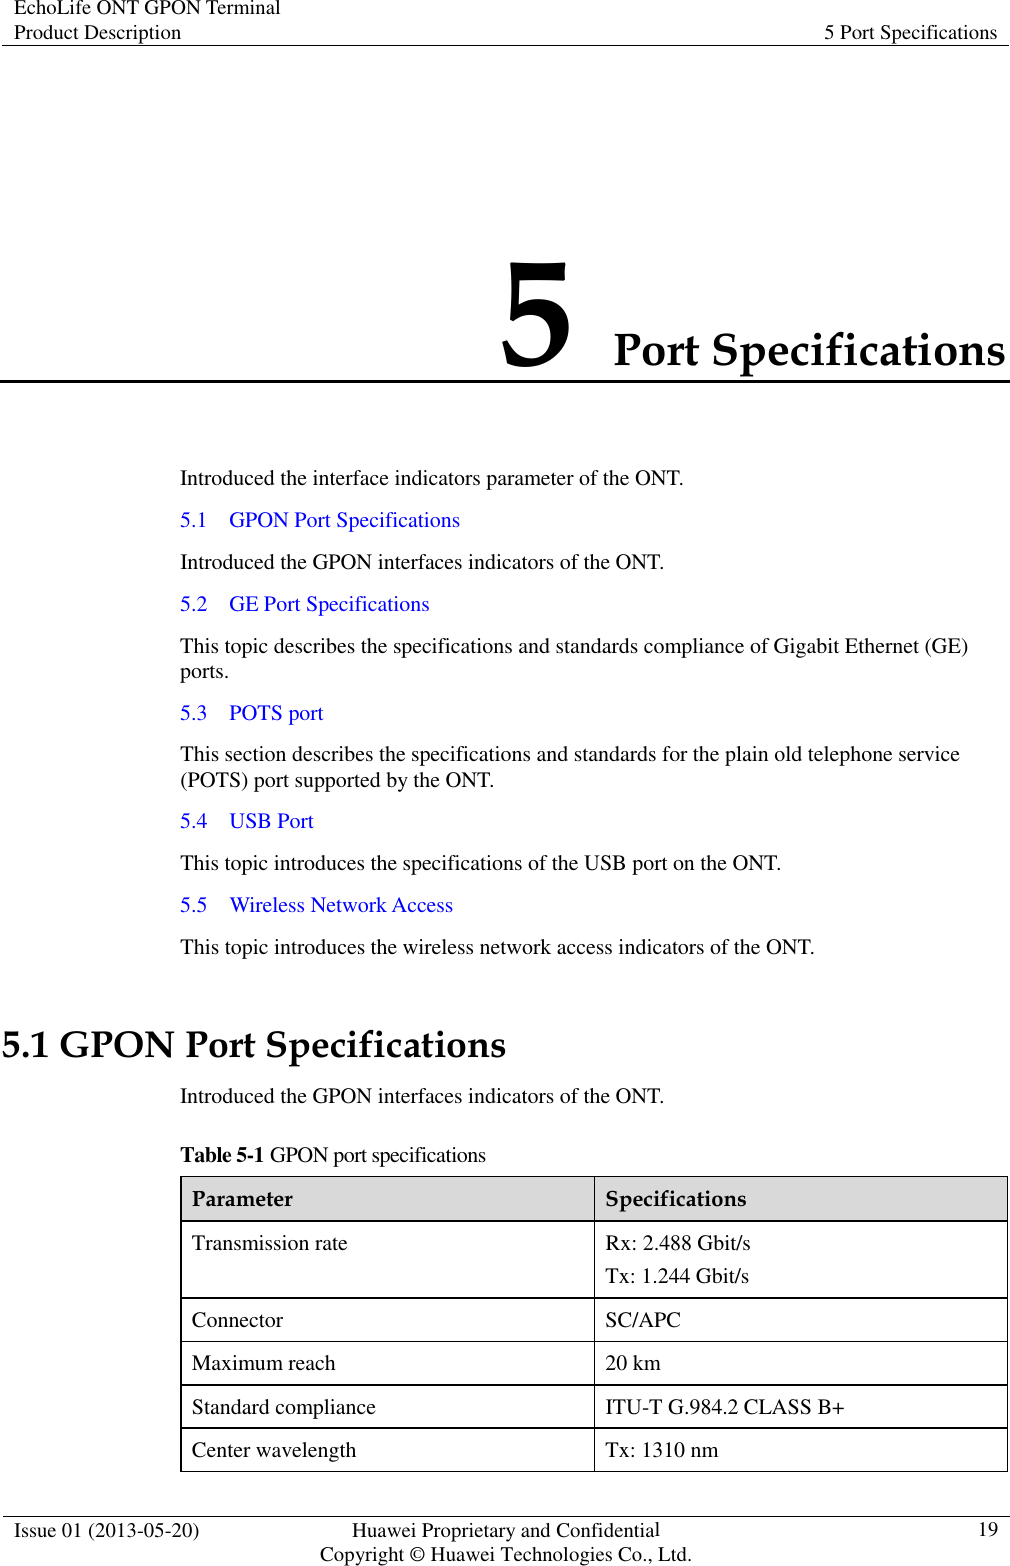 EchoLife ONT GPON Terminal Product Description  5 Port Specifications  Issue 01 (2013-05-20)  Huawei Proprietary and Confidential                   Copyright © Huawei Technologies Co., Ltd. 19  5 Port Specifications Introduced the interface indicators parameter of the ONT. 5.1    GPON Port Specifications Introduced the GPON interfaces indicators of the ONT. 5.2    GE Port Specifications This topic describes the specifications and standards compliance of Gigabit Ethernet (GE) ports. 5.3    POTS port This section describes the specifications and standards for the plain old telephone service (POTS) port supported by the ONT. 5.4    USB Port This topic introduces the specifications of the USB port on the ONT. 5.5    Wireless Network Access This topic introduces the wireless network access indicators of the ONT. 5.1 GPON Port Specifications Introduced the GPON interfaces indicators of the ONT. Table 5-1 GPON port specifications Parameter  Specifications Transmission rate  Rx: 2.488 Gbit/s Tx: 1.244 Gbit/s Connector  SC/APC Maximum reach  20 km Standard compliance  ITU-T G.984.2 CLASS B+ Center wavelength  Tx: 1310 nm 